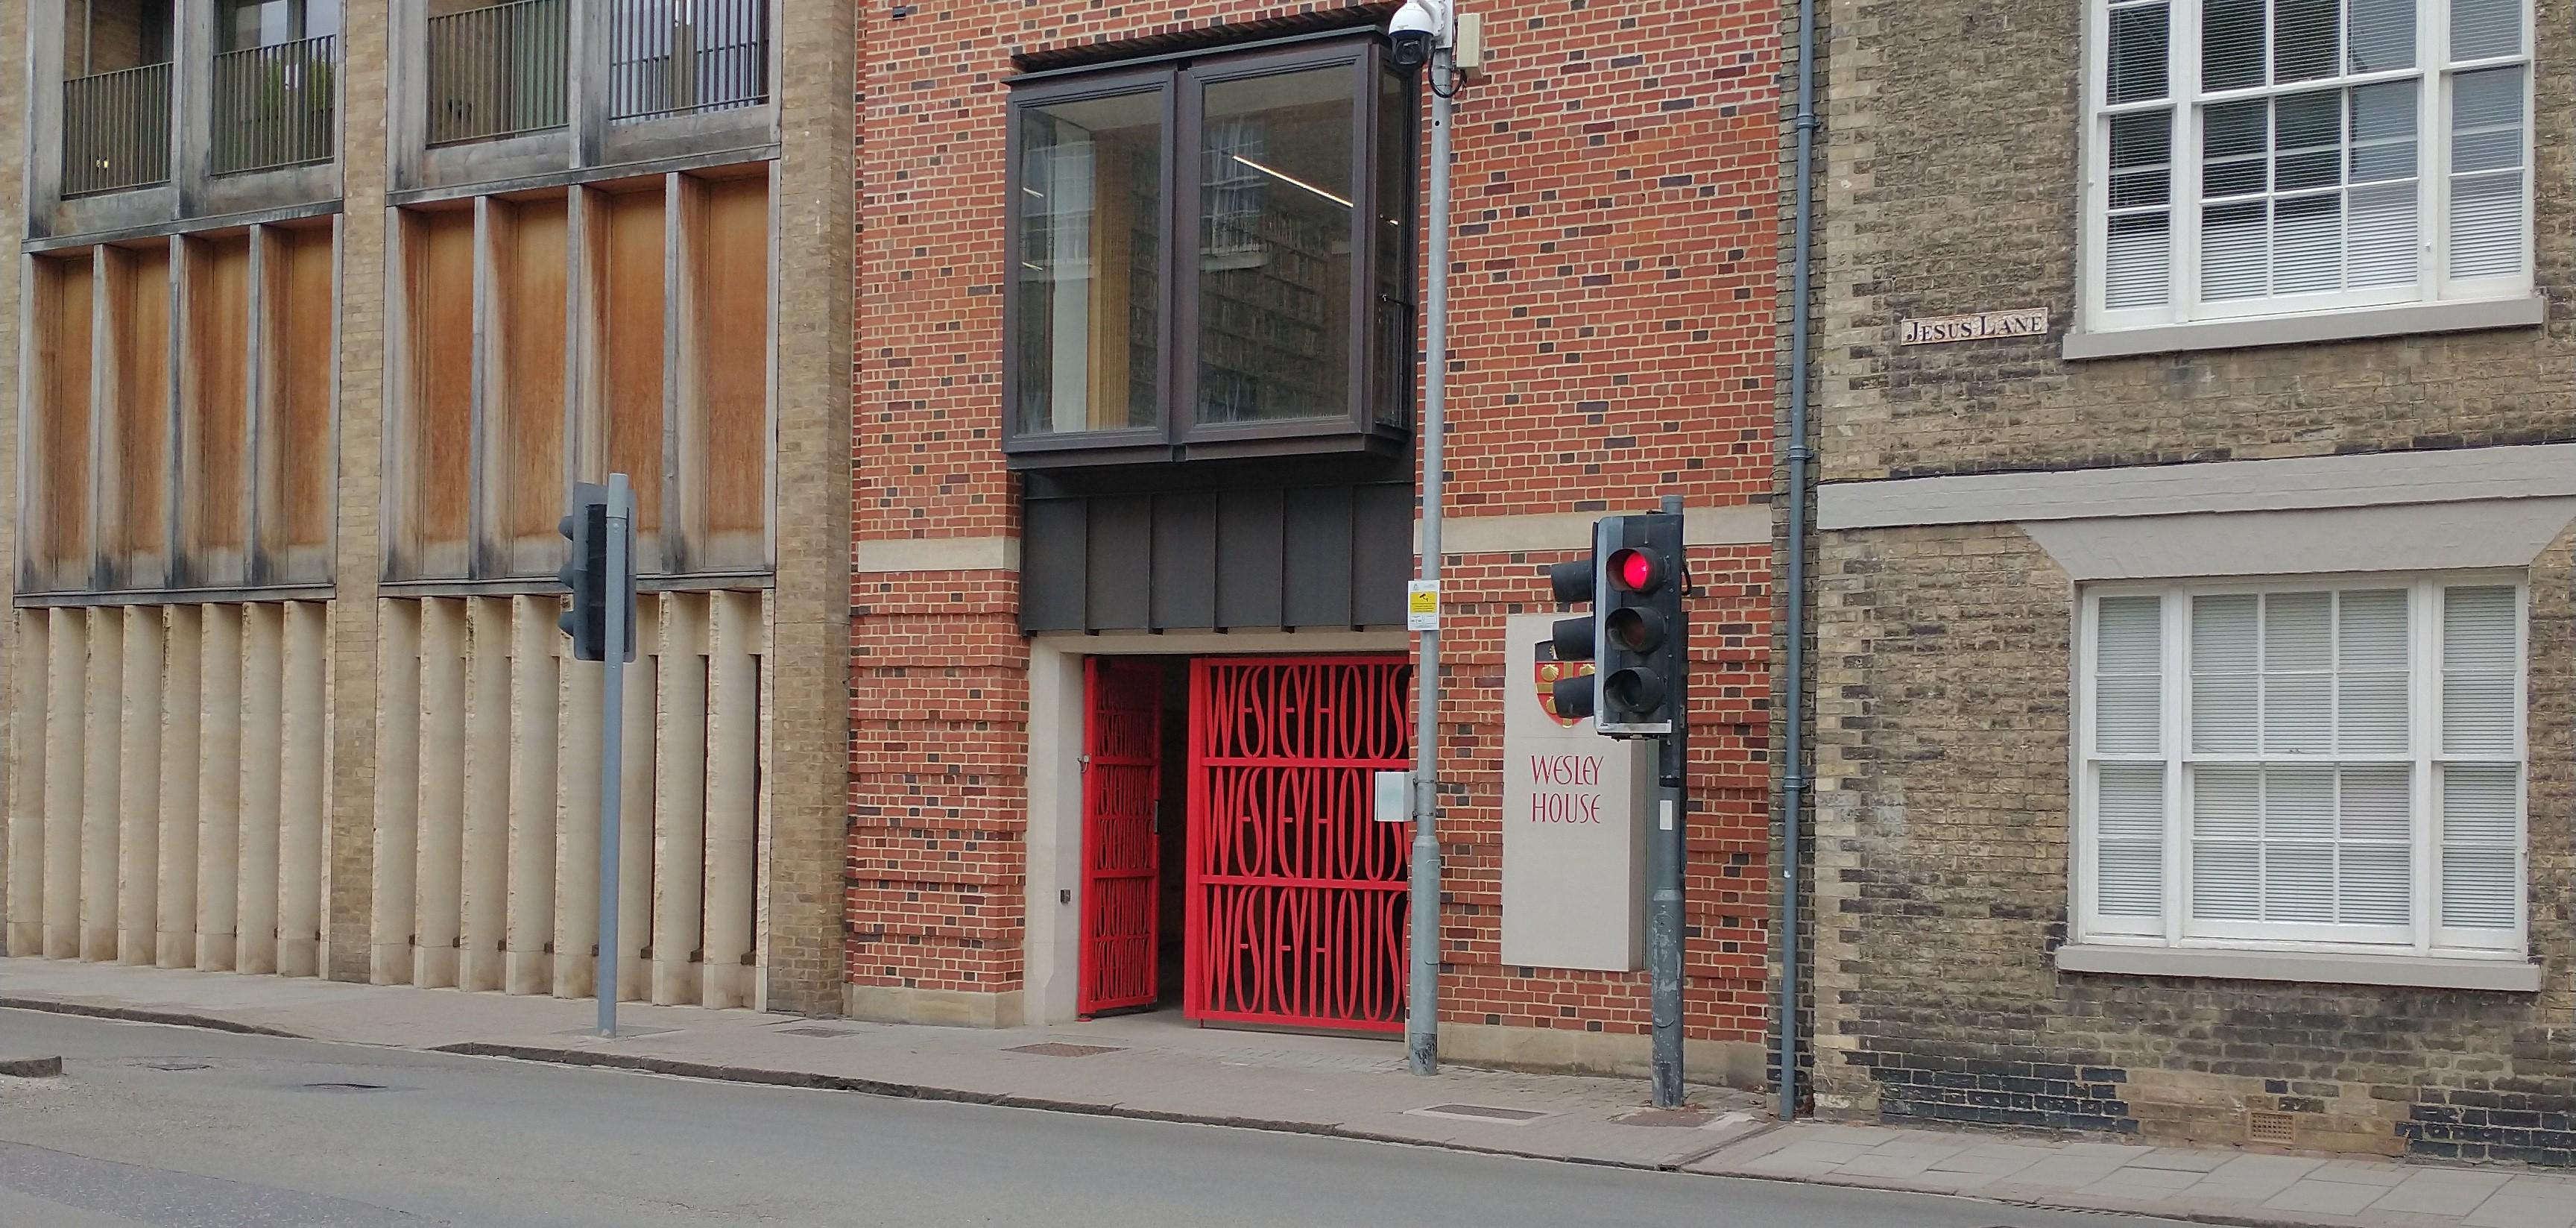 Street scene with red gates repeating the words "Wesley House"